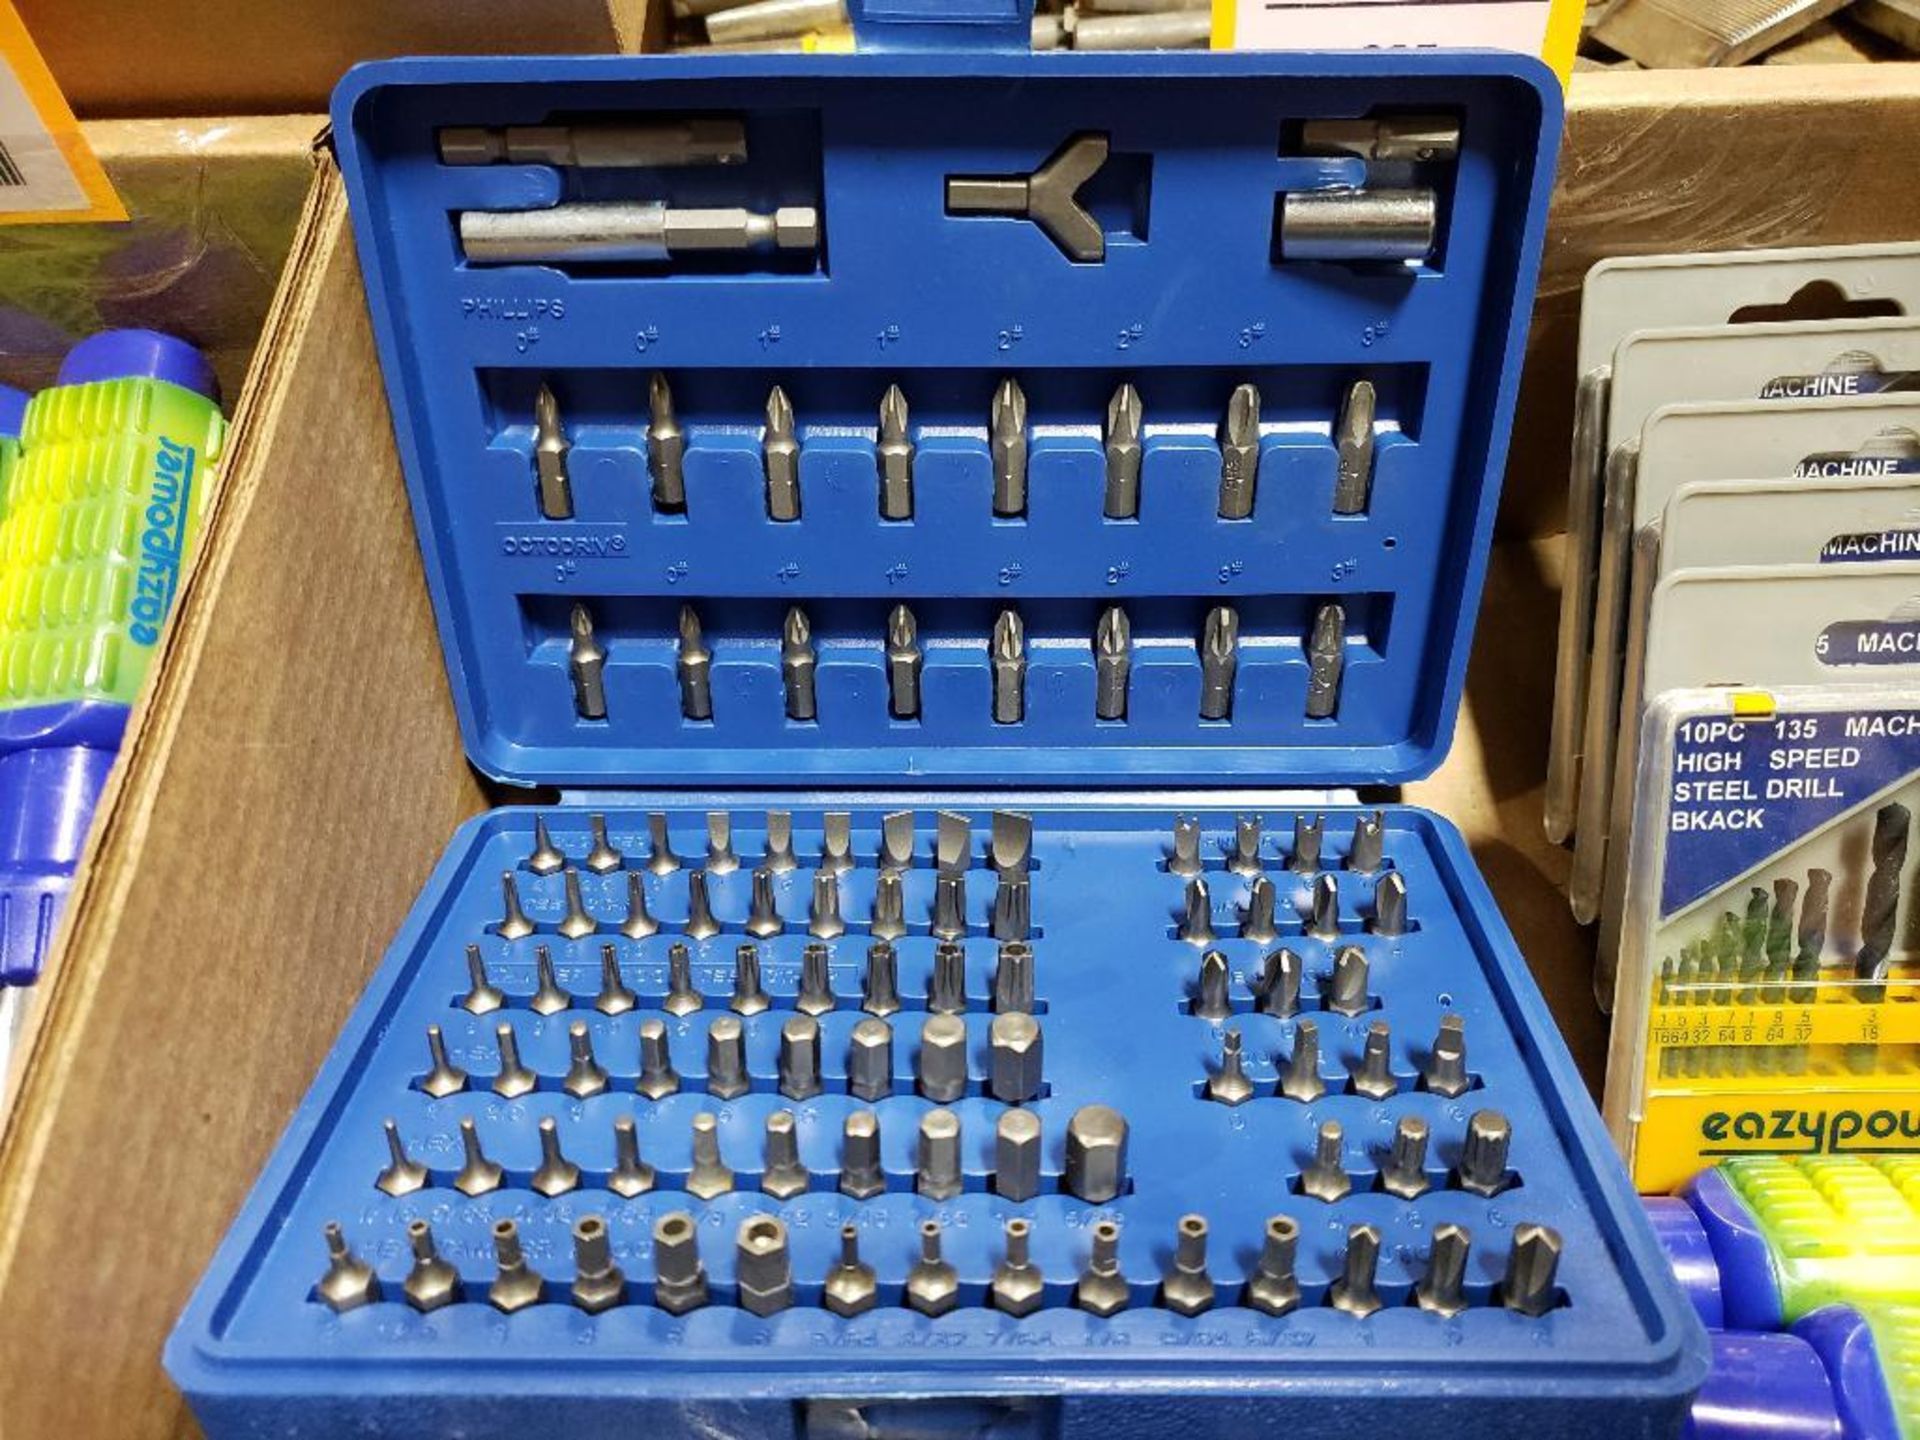 Large assortment of drill bit, screw driver, and bit sets. New as pictured. - Image 5 of 5